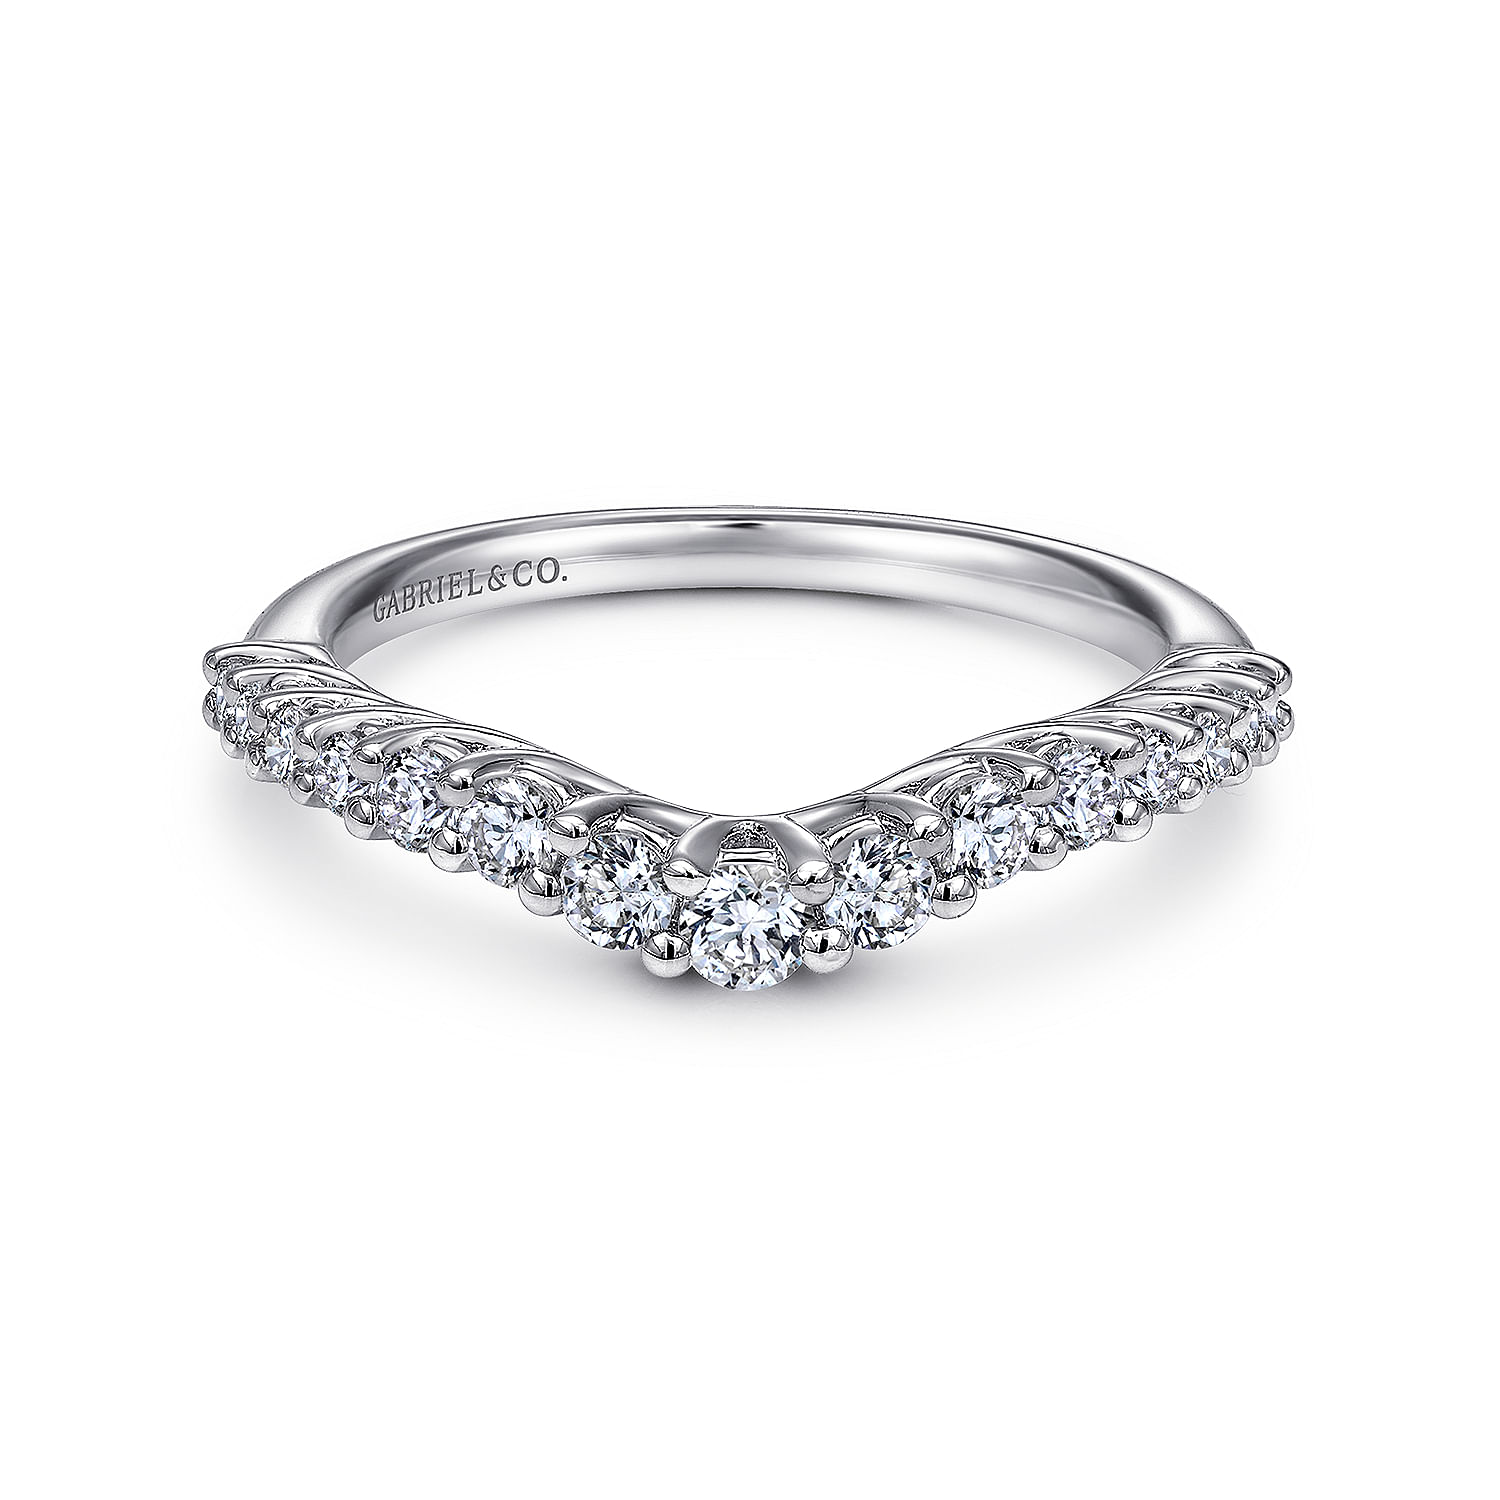 Libby - Curved 14K White Gold Shared Prong Diamond Wedding Band